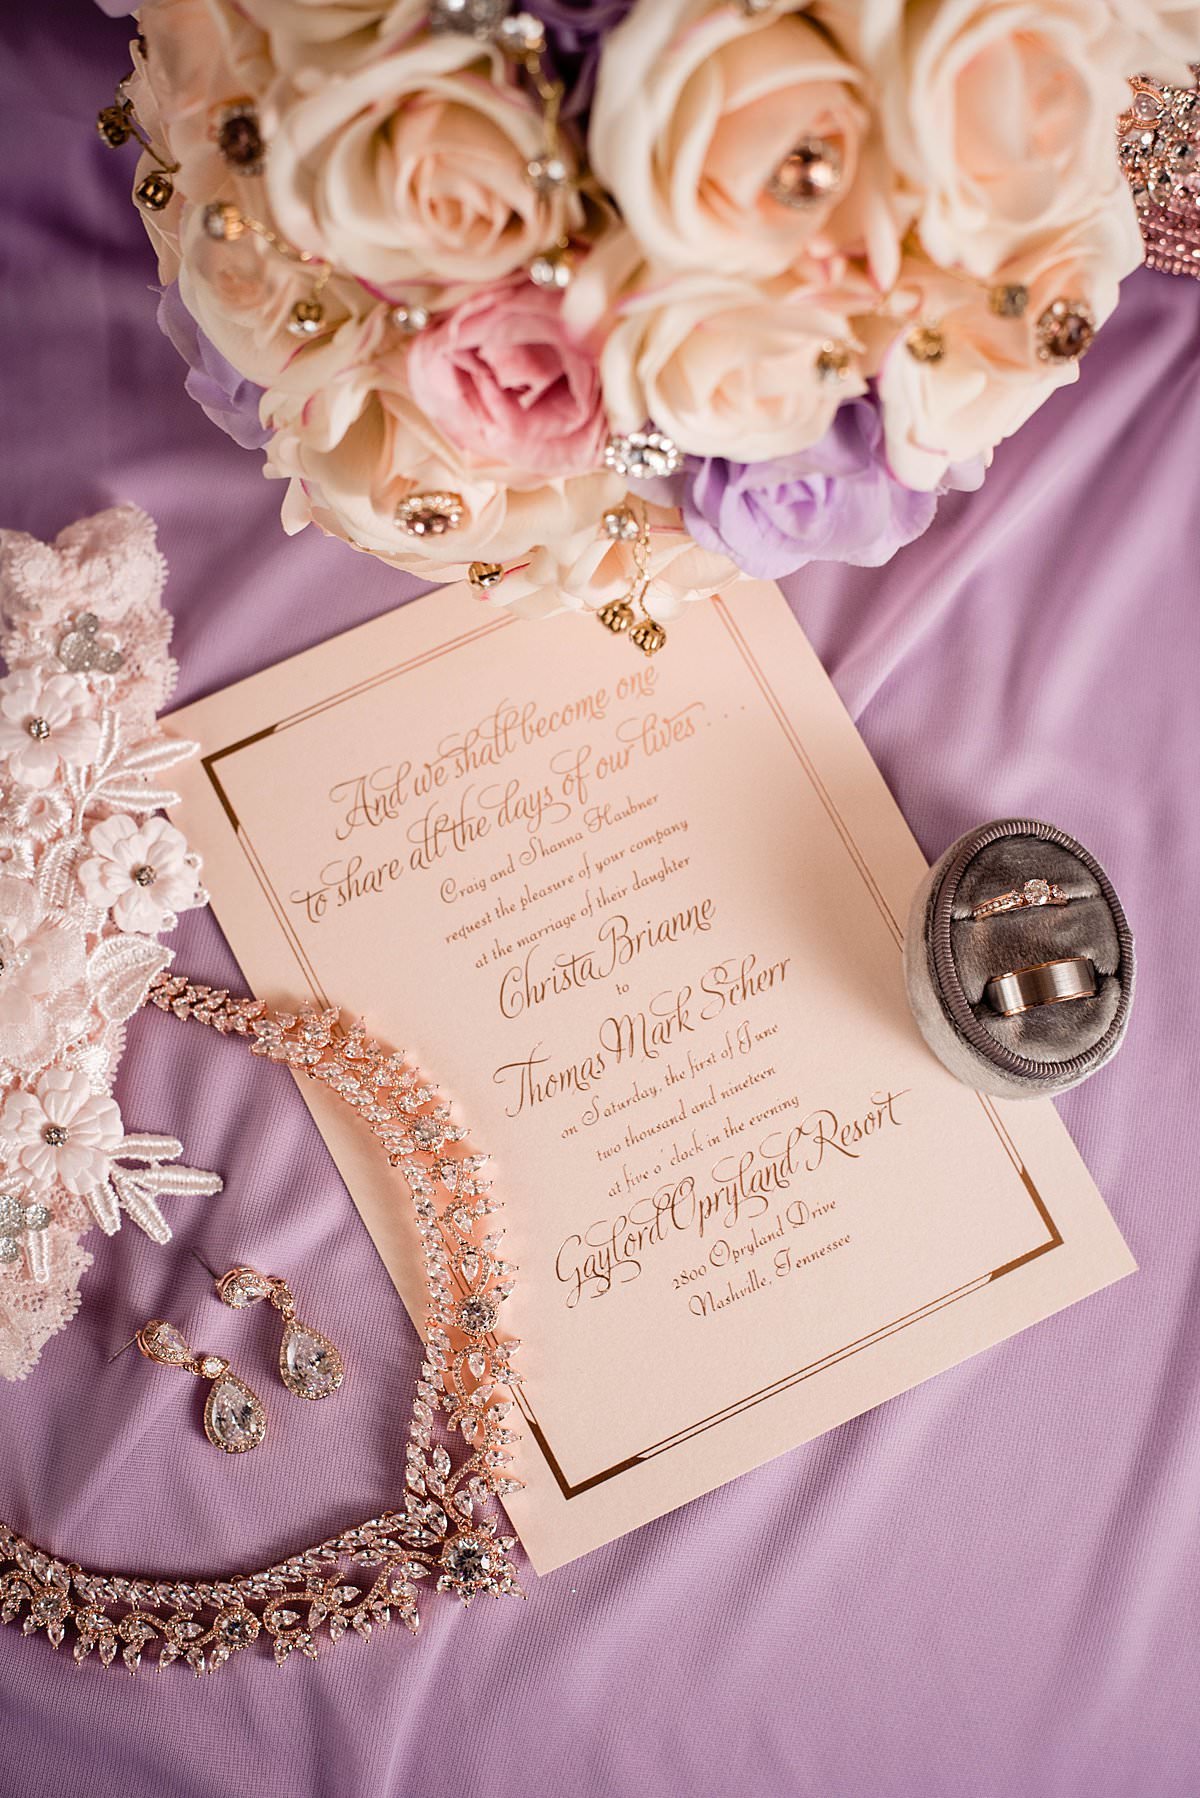 Wedding invitation with ivory, pink and purple roses and brides rose gold jewelry around